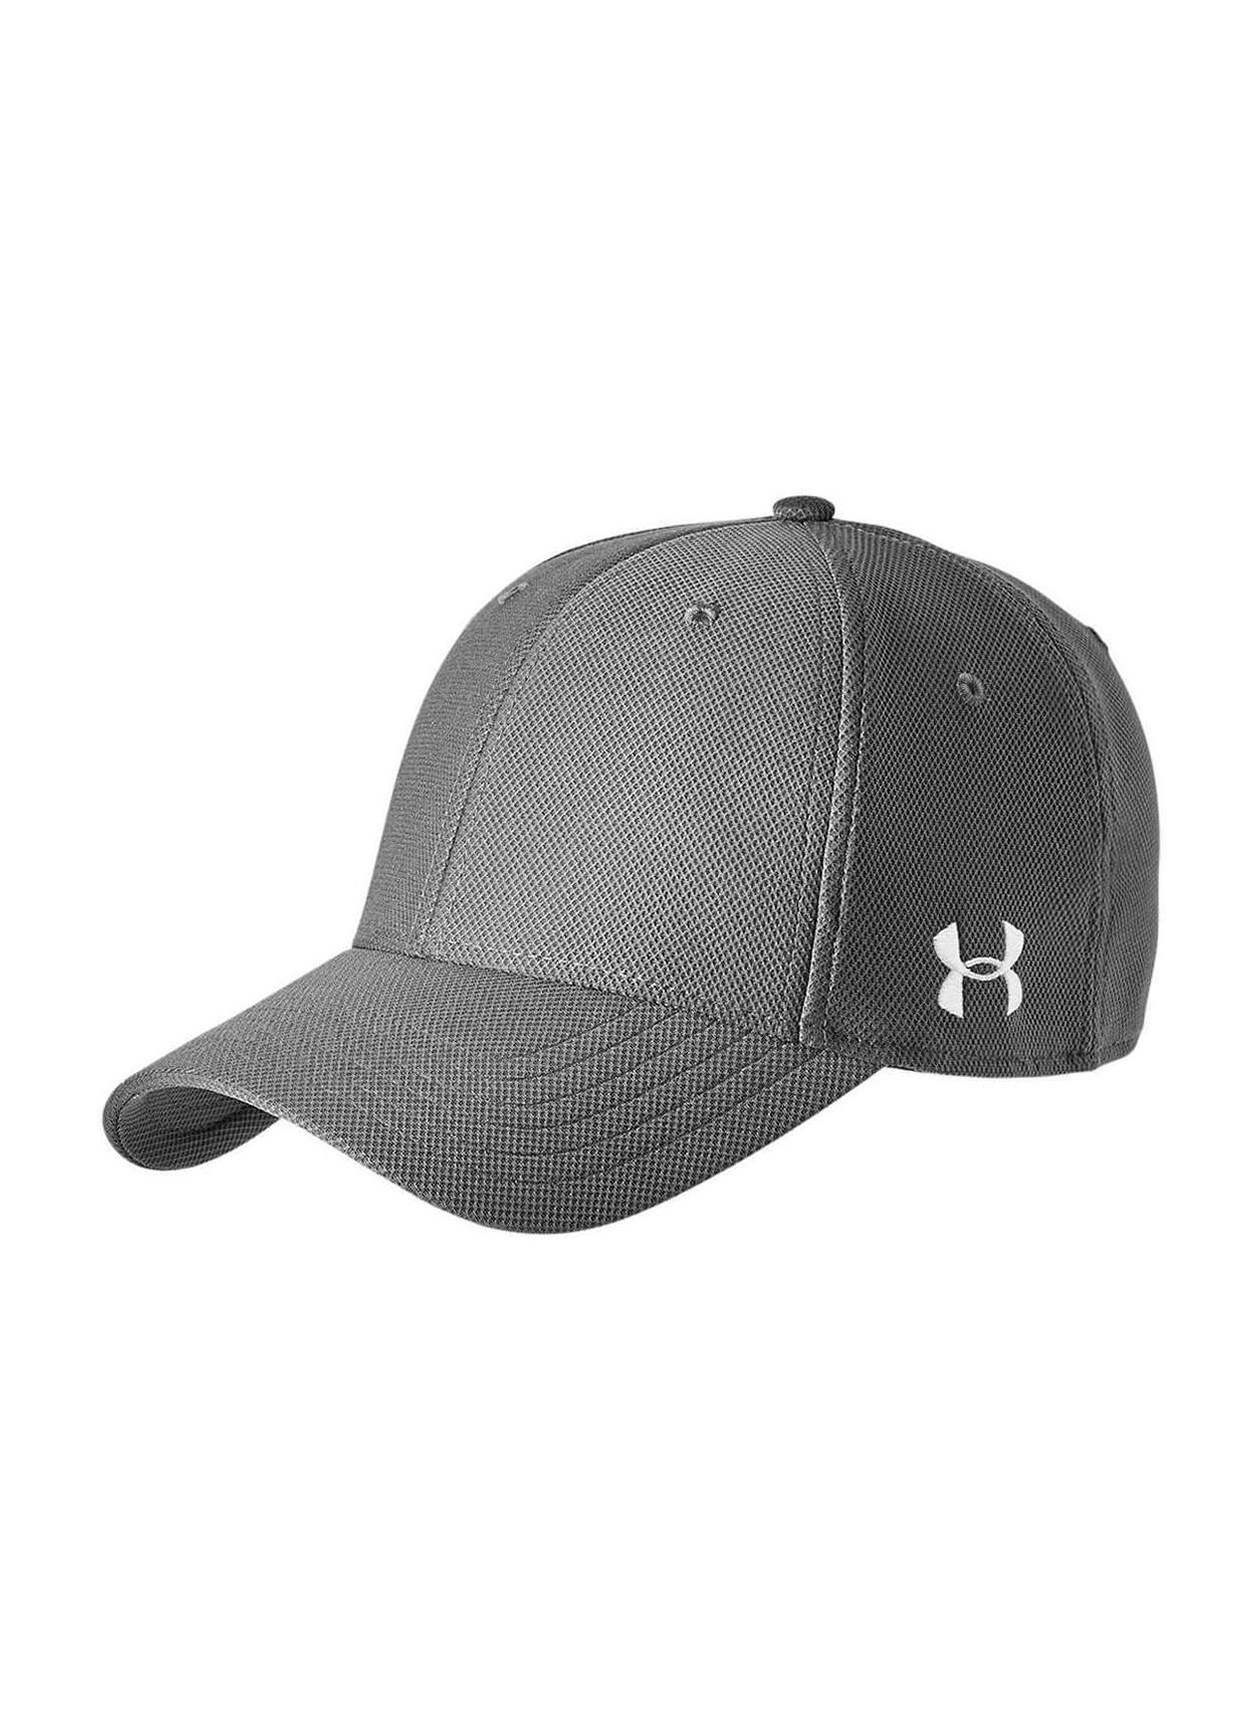 Graphite Under Armour Blitzing Curved Hat | Under Armour